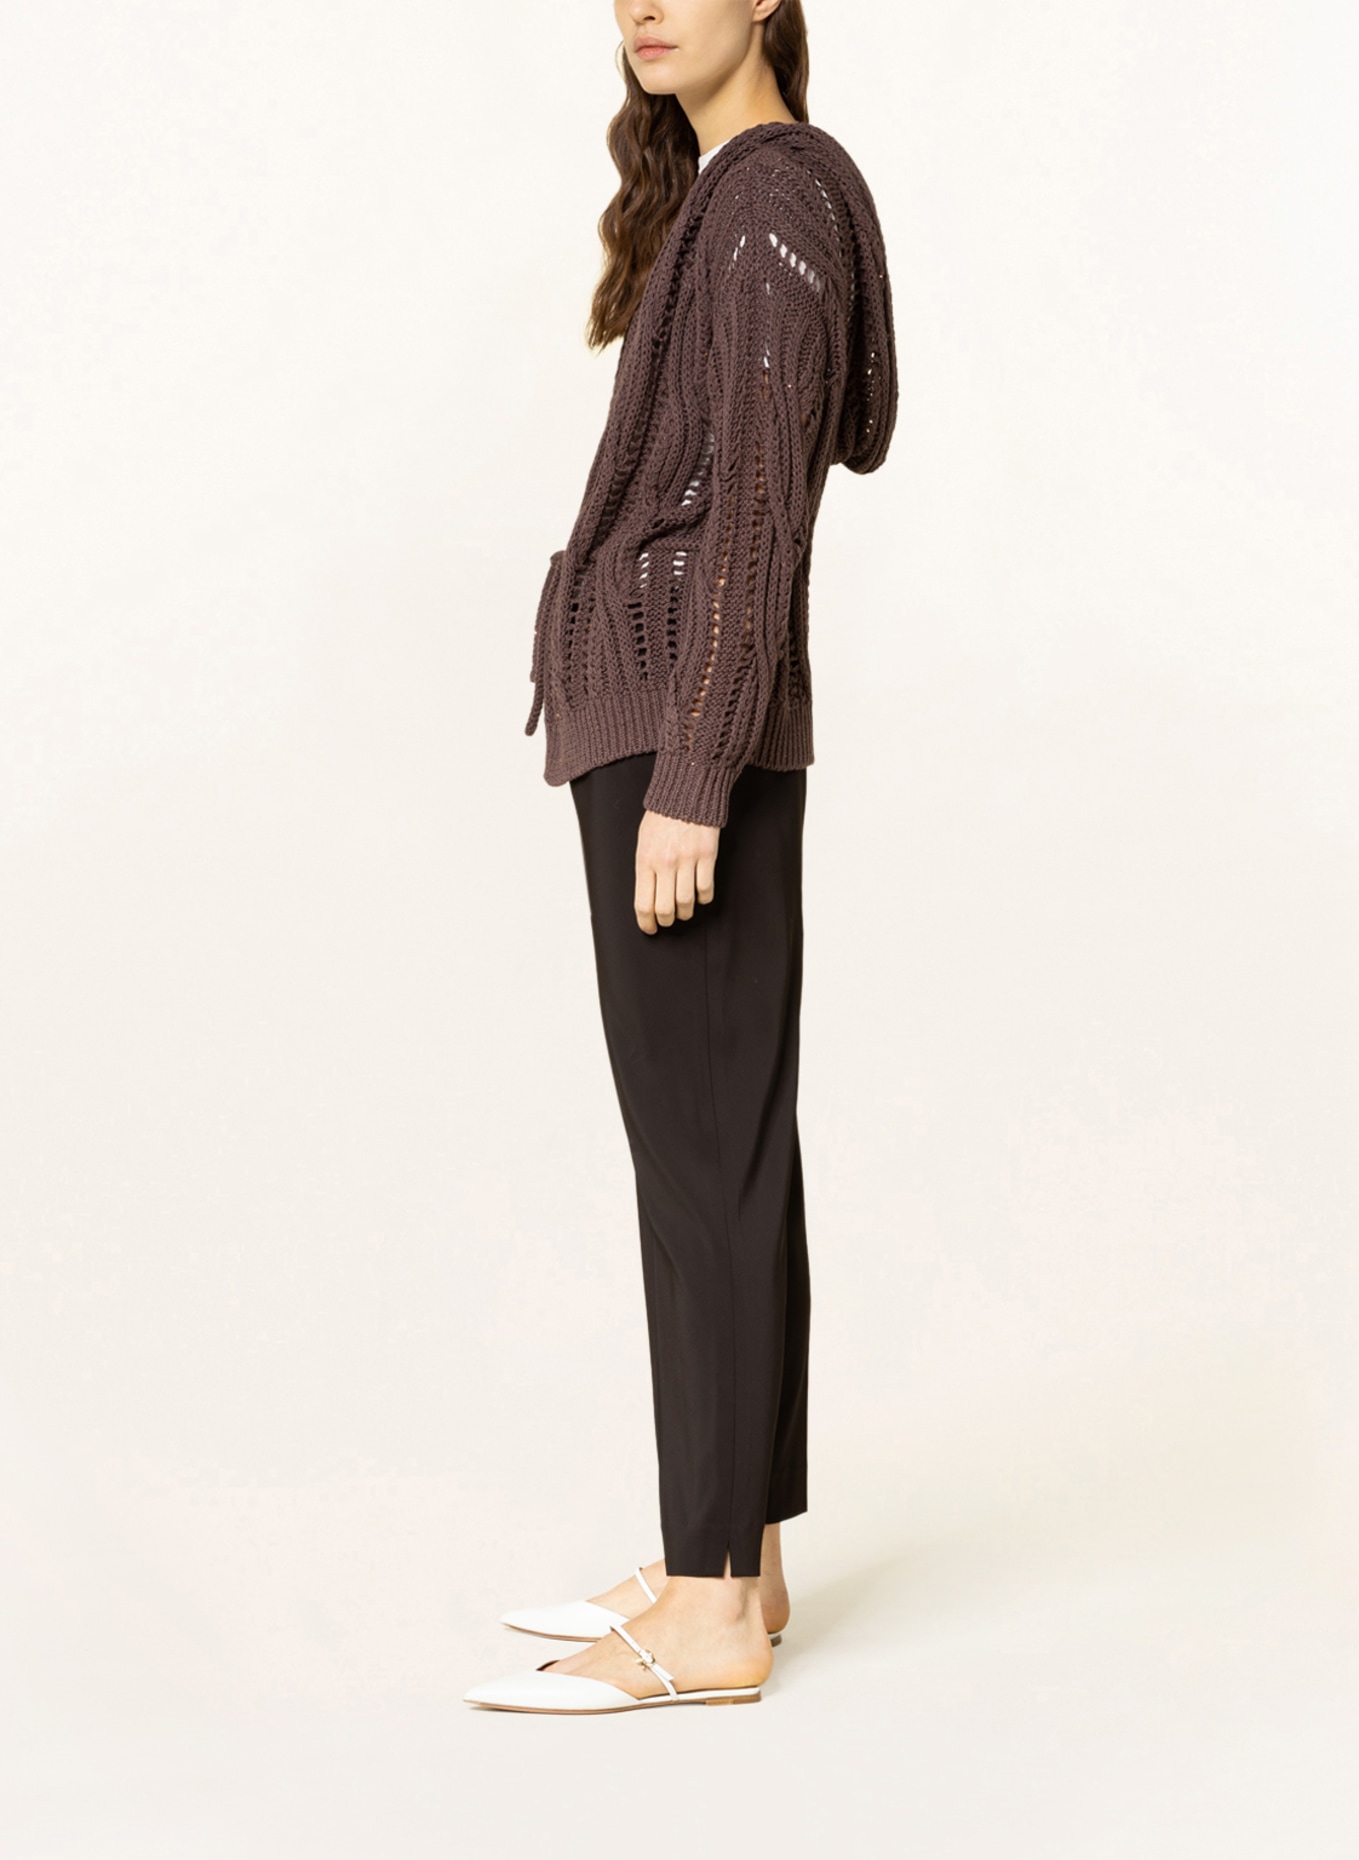 FABIANA FILIPPI Knit cardigan with sequins, Color: DARK BROWN (Image 4)